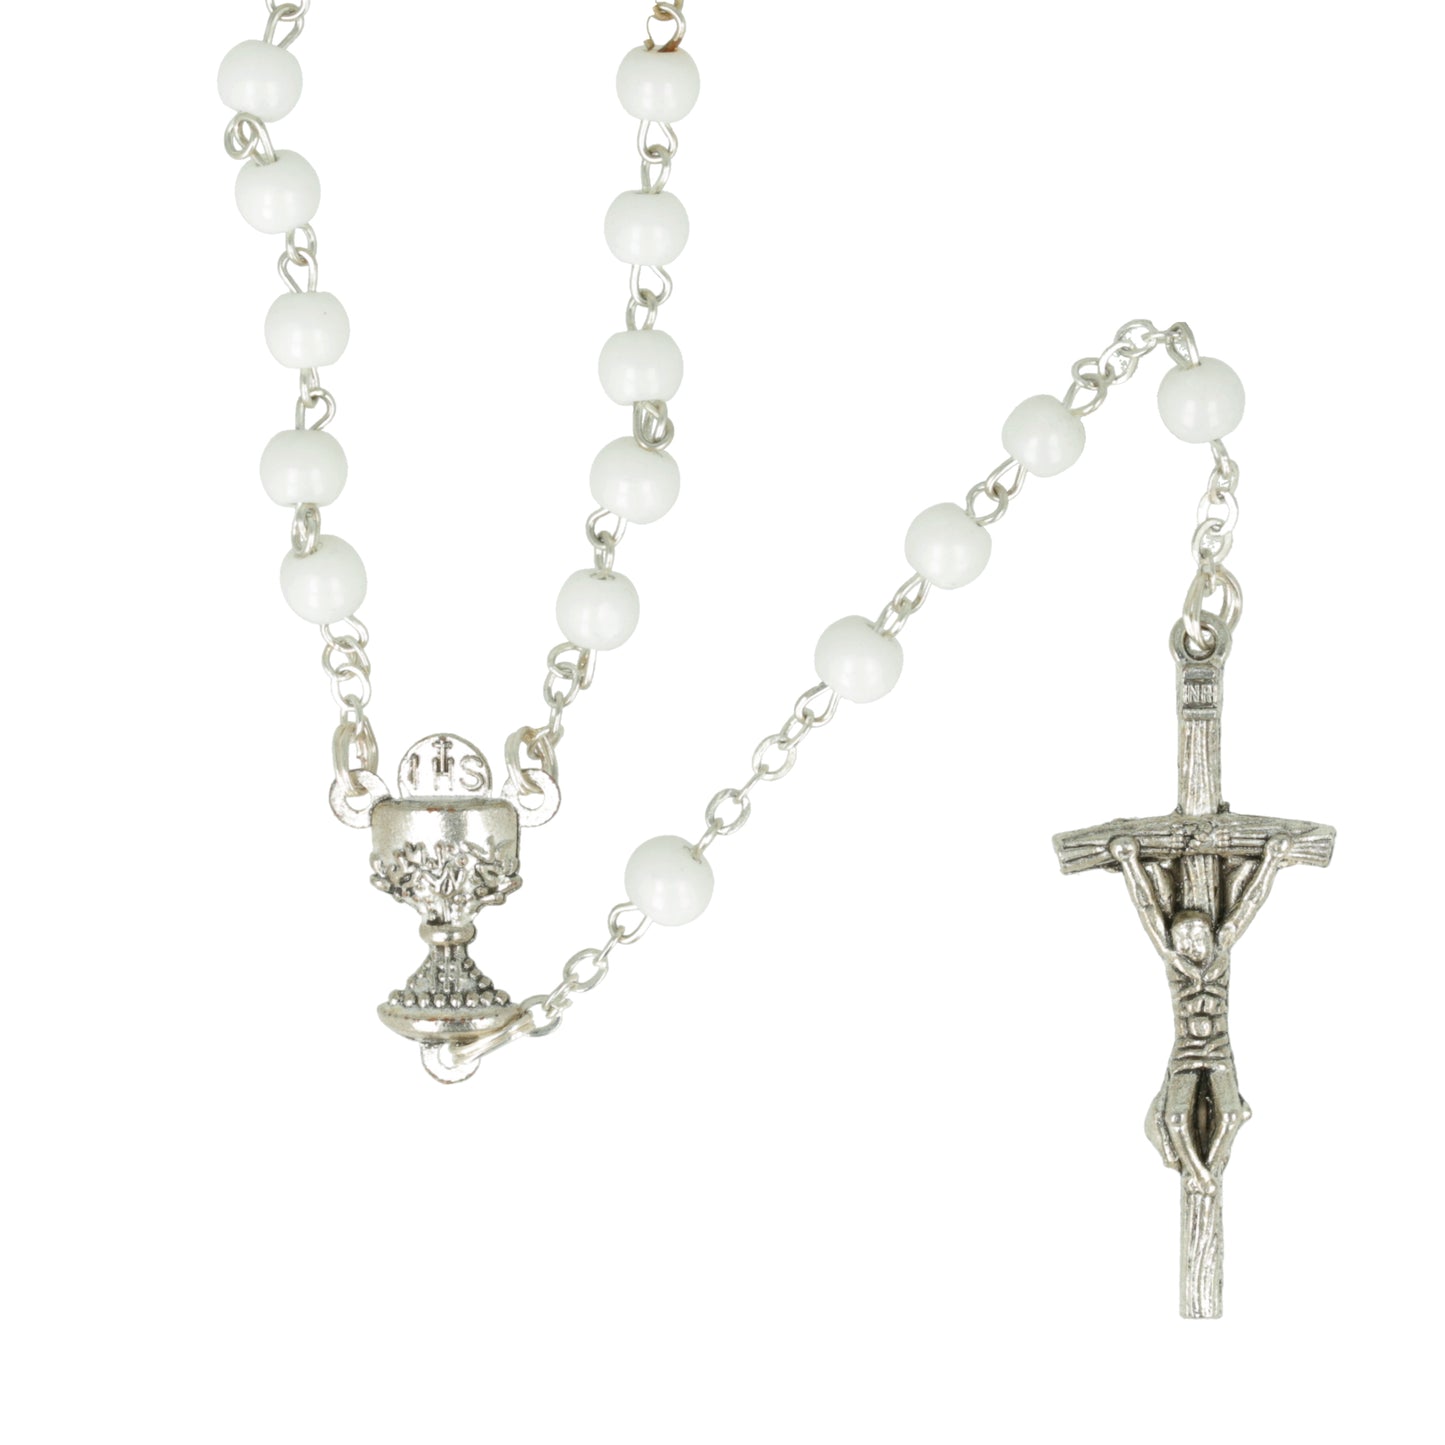 Rosary Communion Center White Nacarina. Souvenirs from Italy